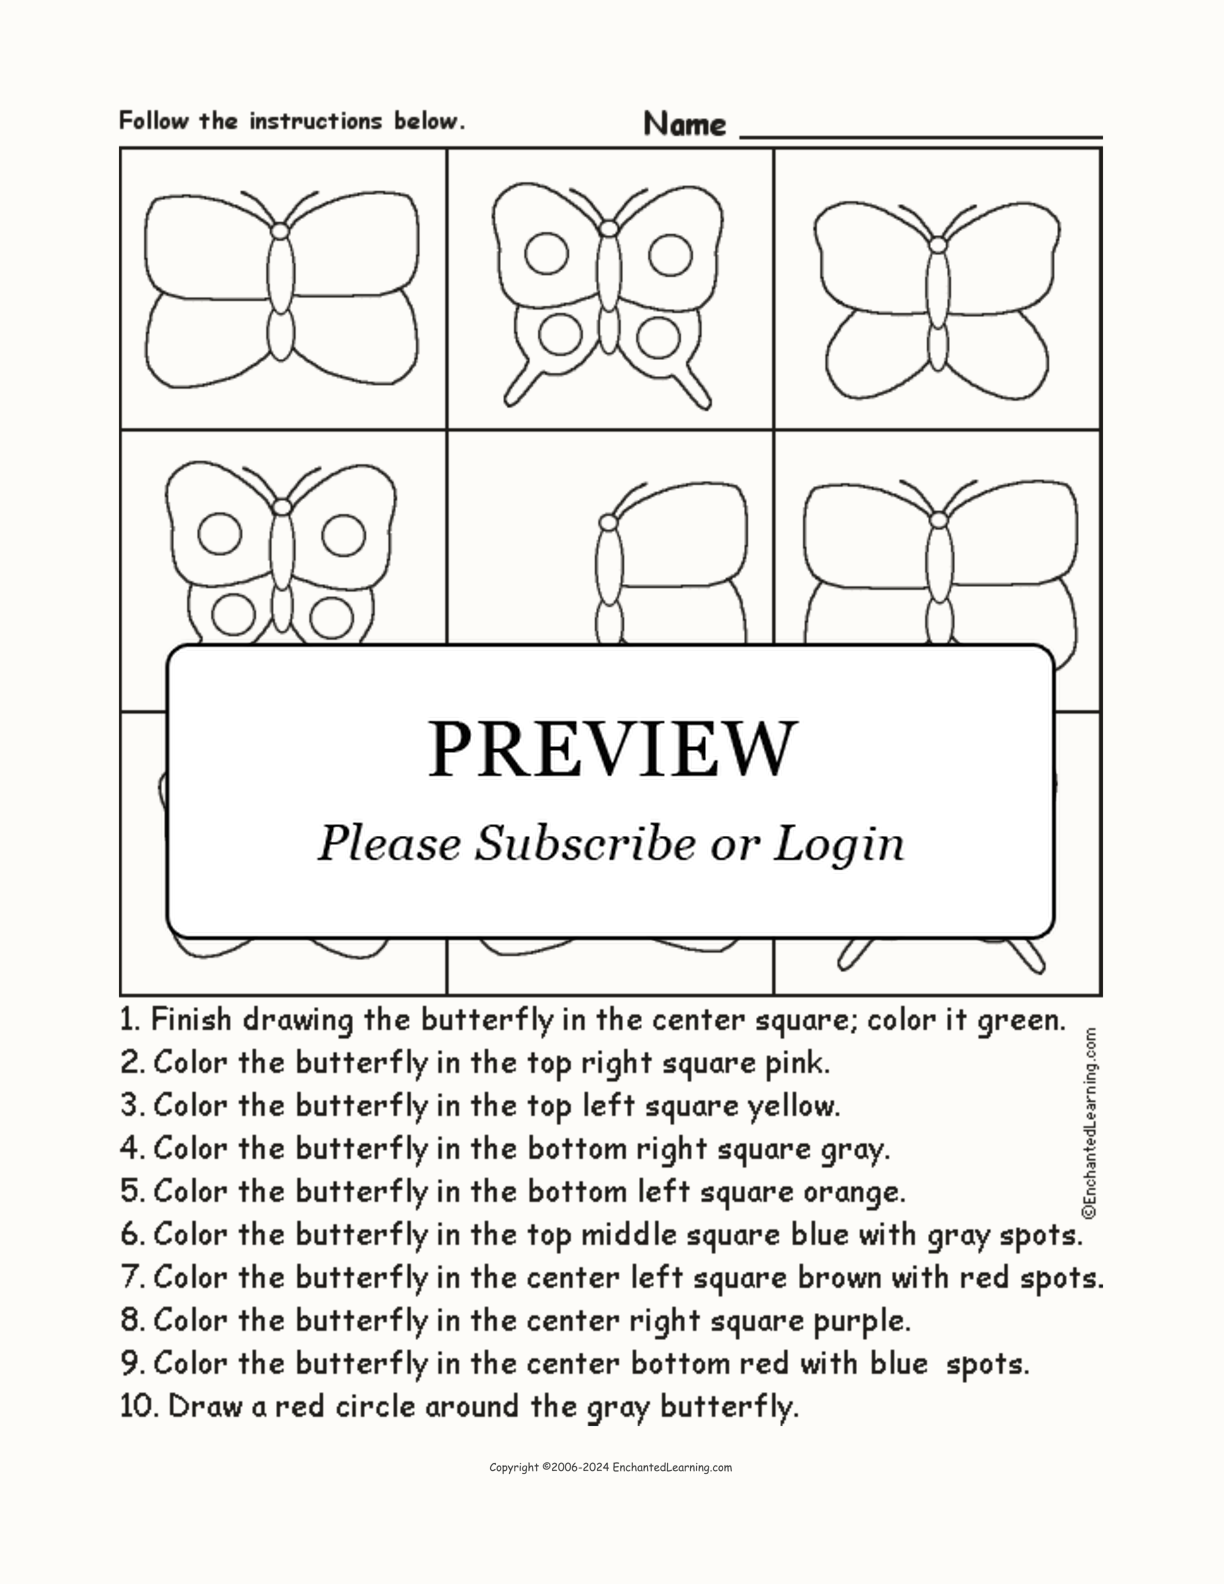 Butterflies - Follow the Instructions interactive worksheet page 1